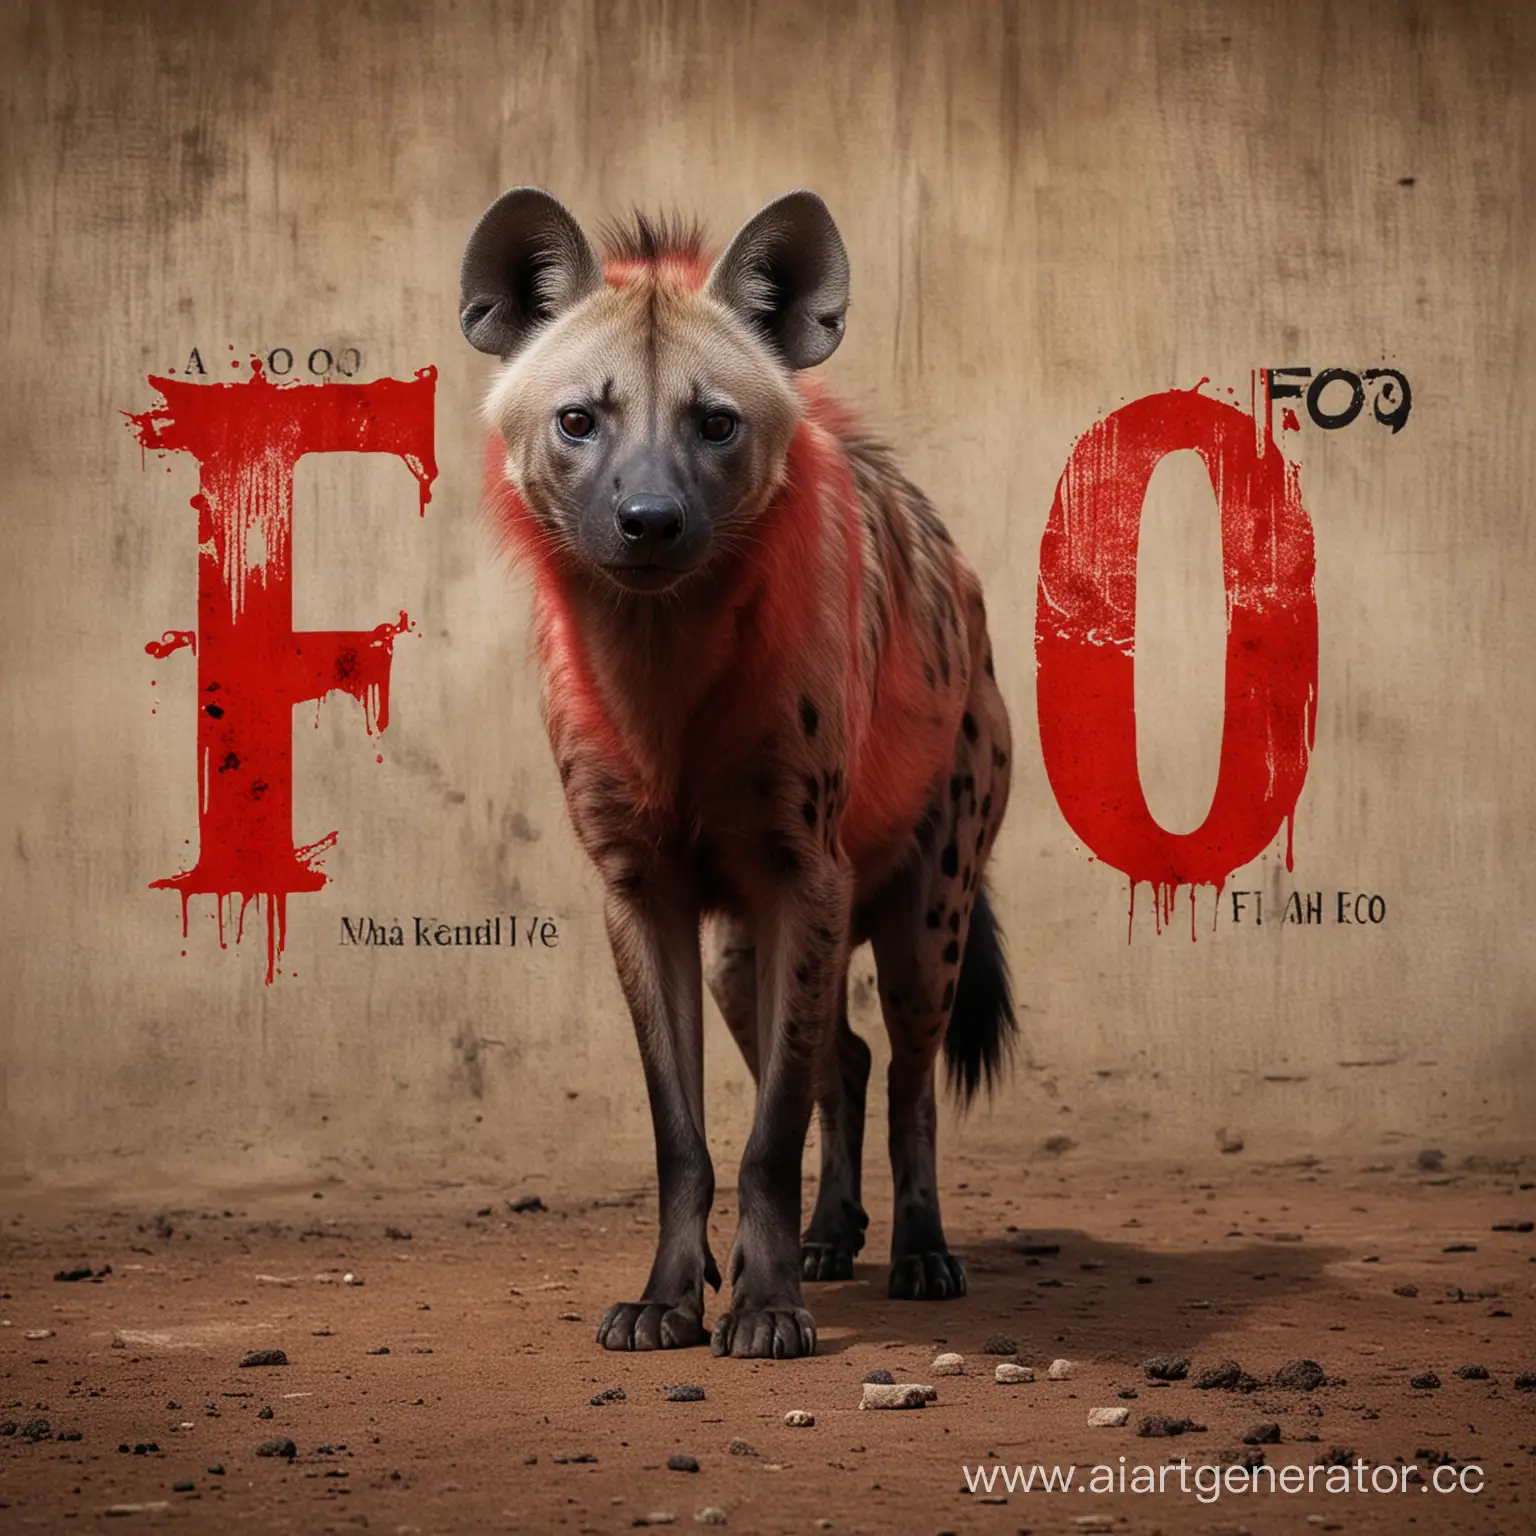 Black-and-Red-Artwork-Featuring-Hyena-with-FAO-Inscription